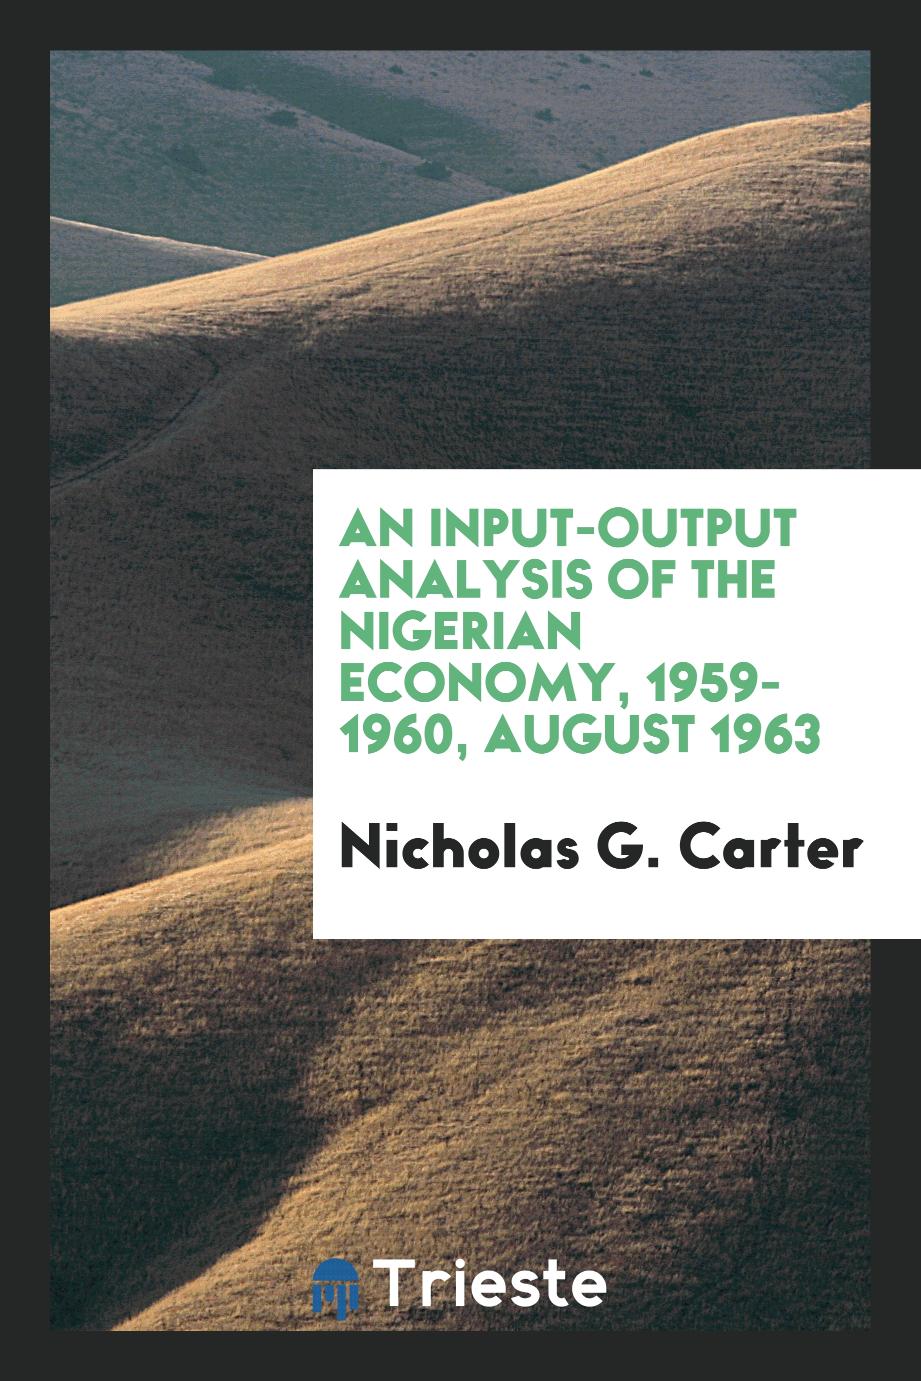 An input-output analysis of the Nigerian economy, 1959-1960, august 1963